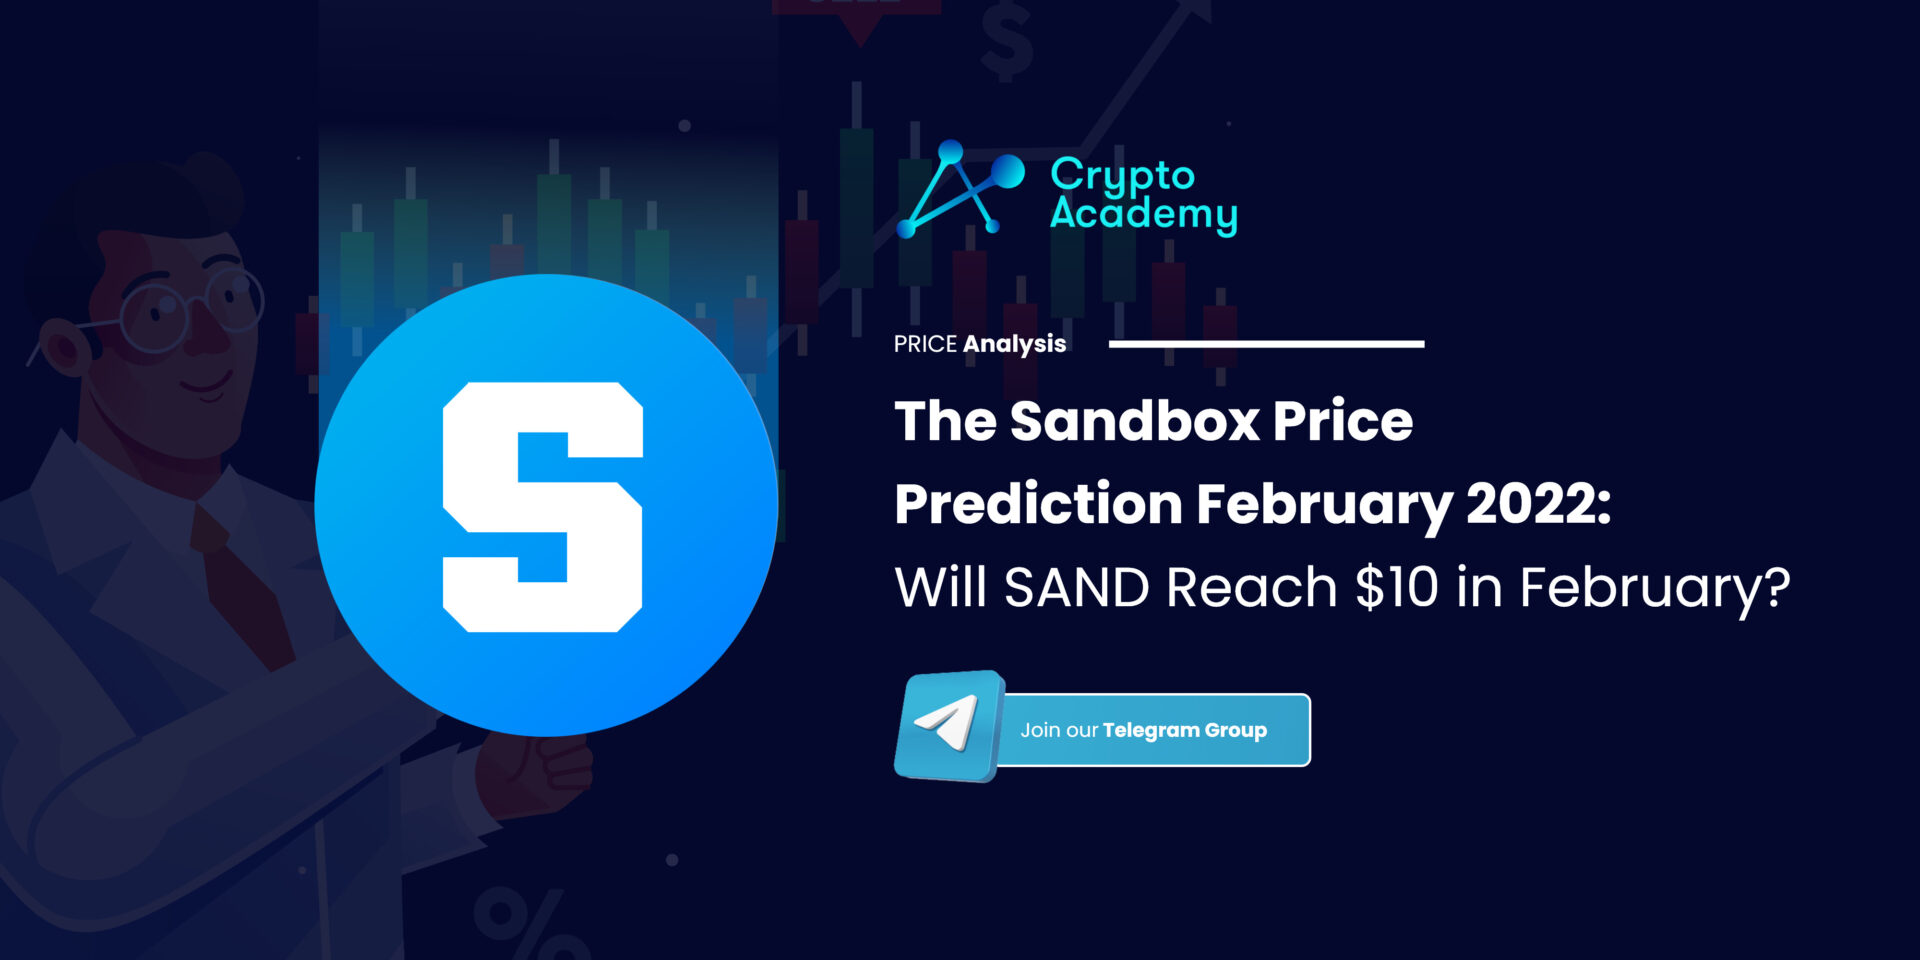 The Sandbox Price Prediction February 2022: Will SAND Reach $10 in February?